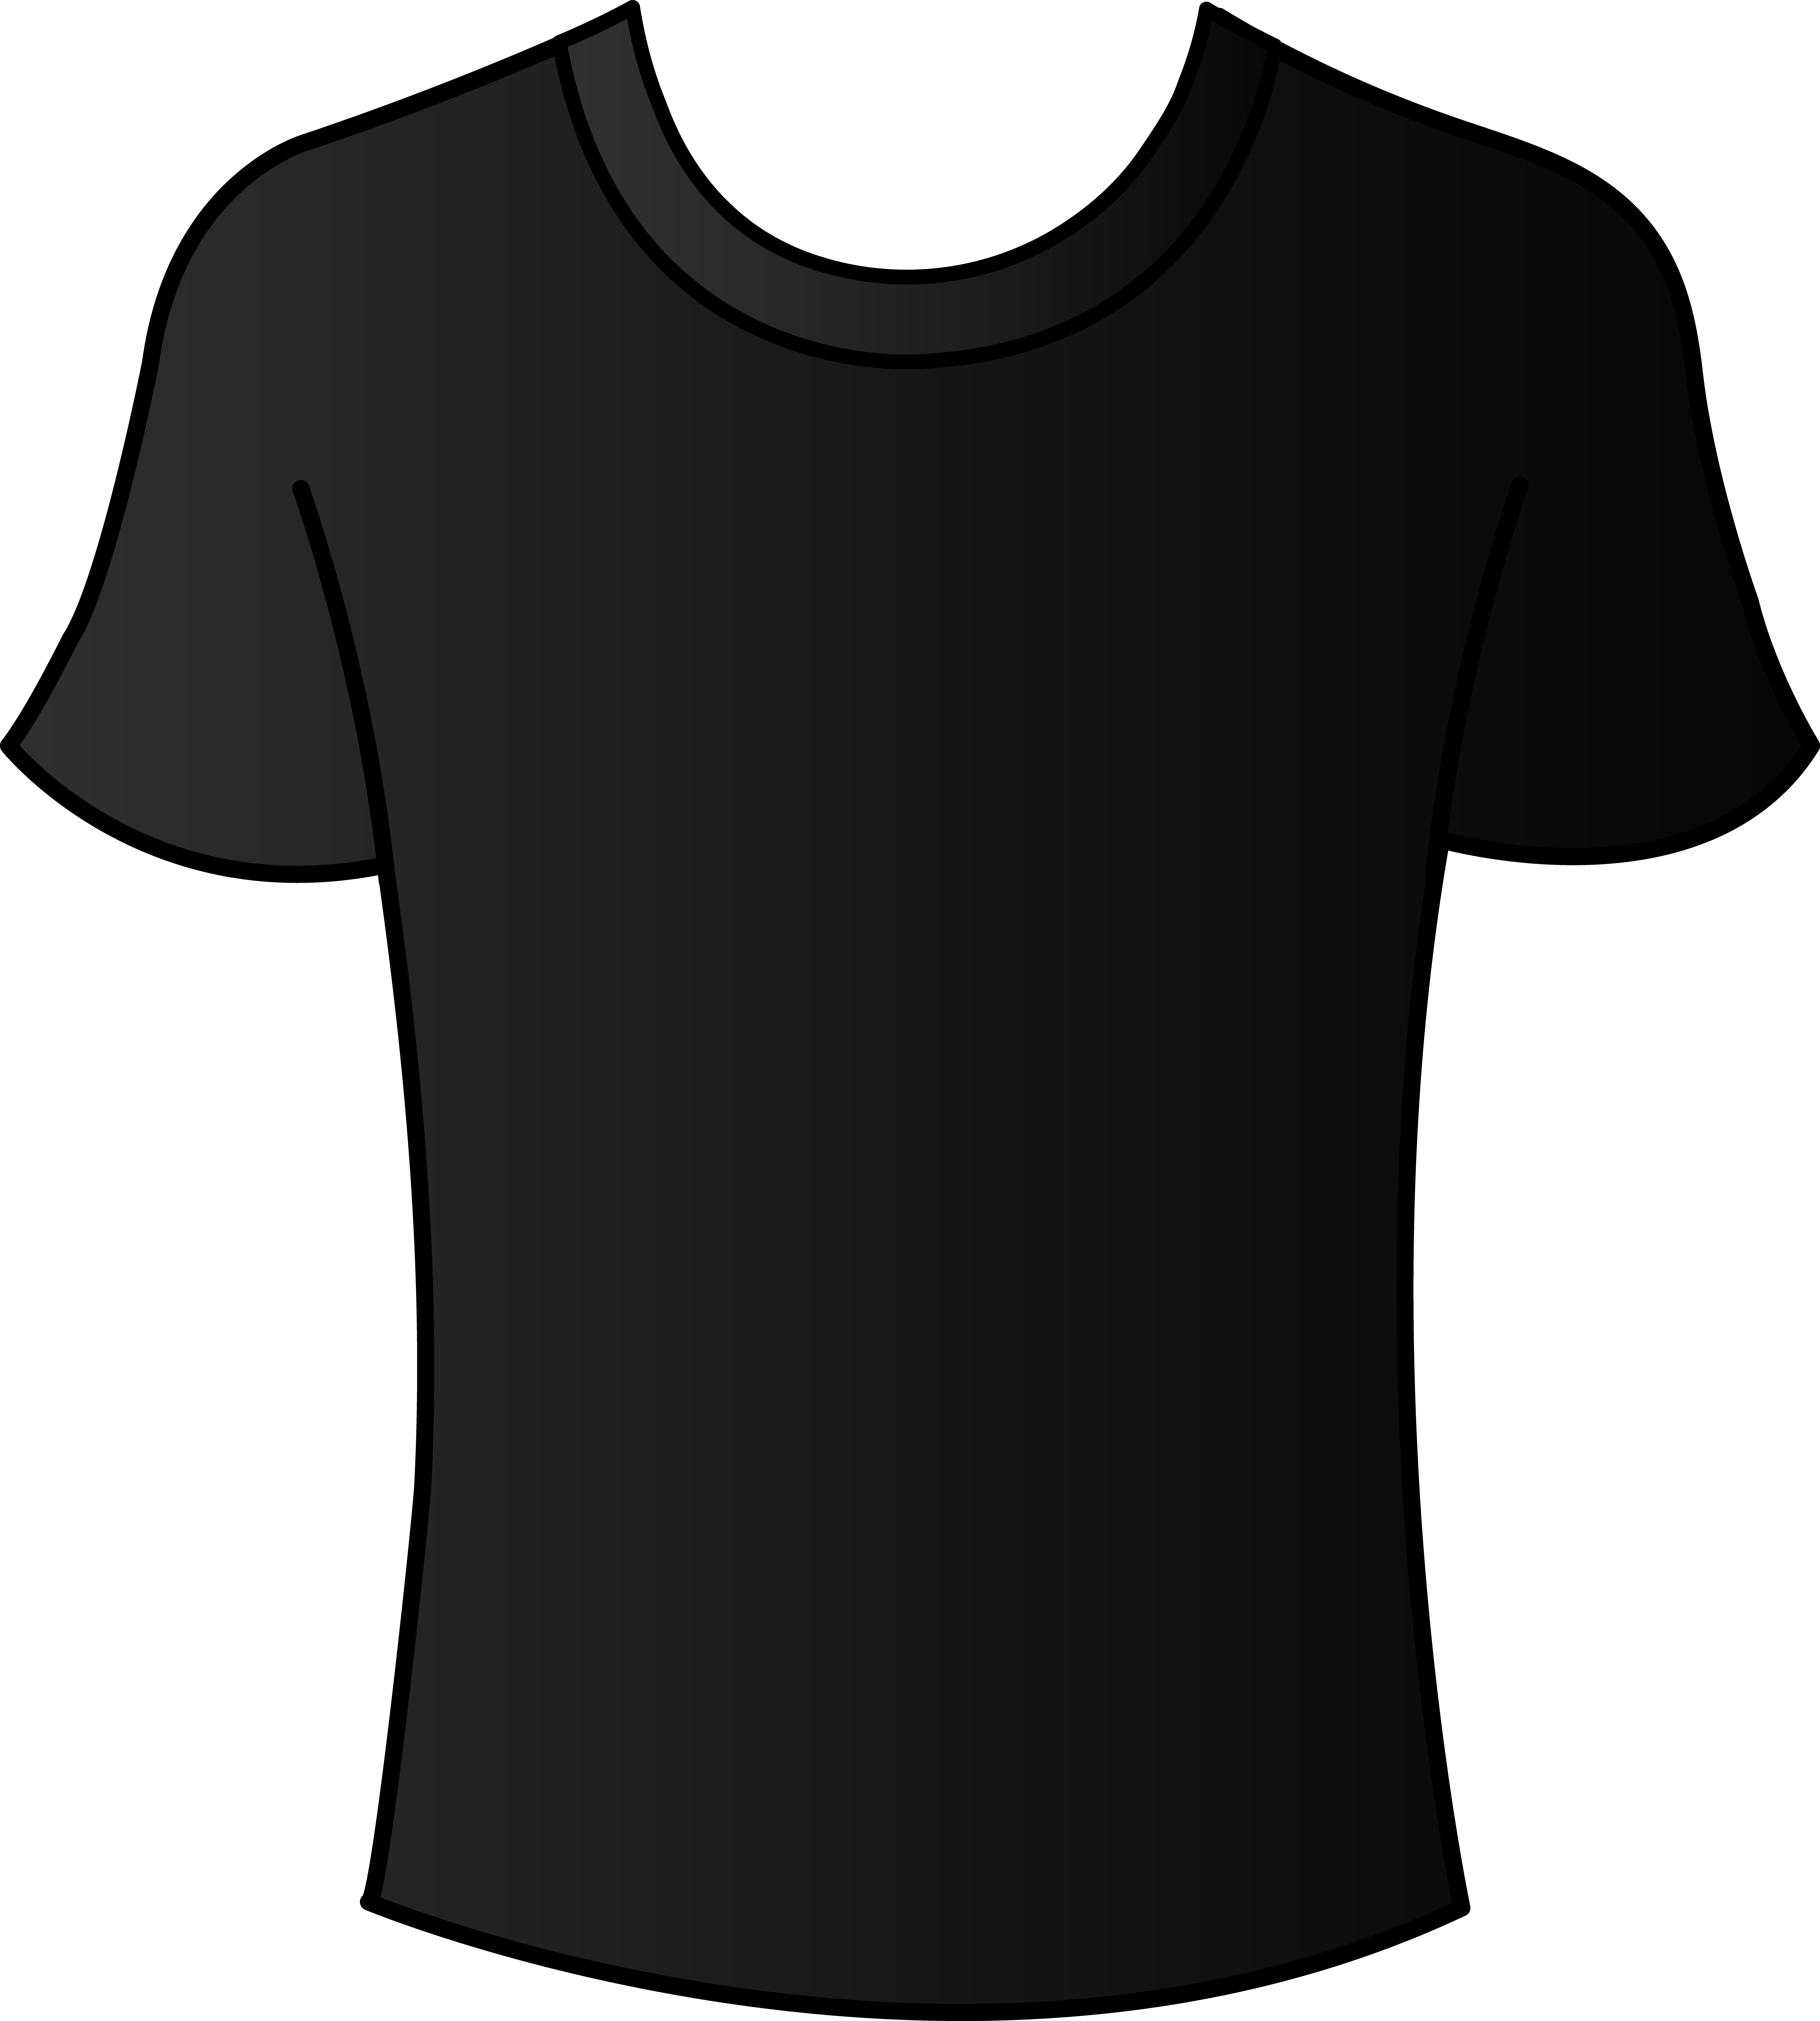 Black T Shirt Template Front And Back Psd - ClipArt Best